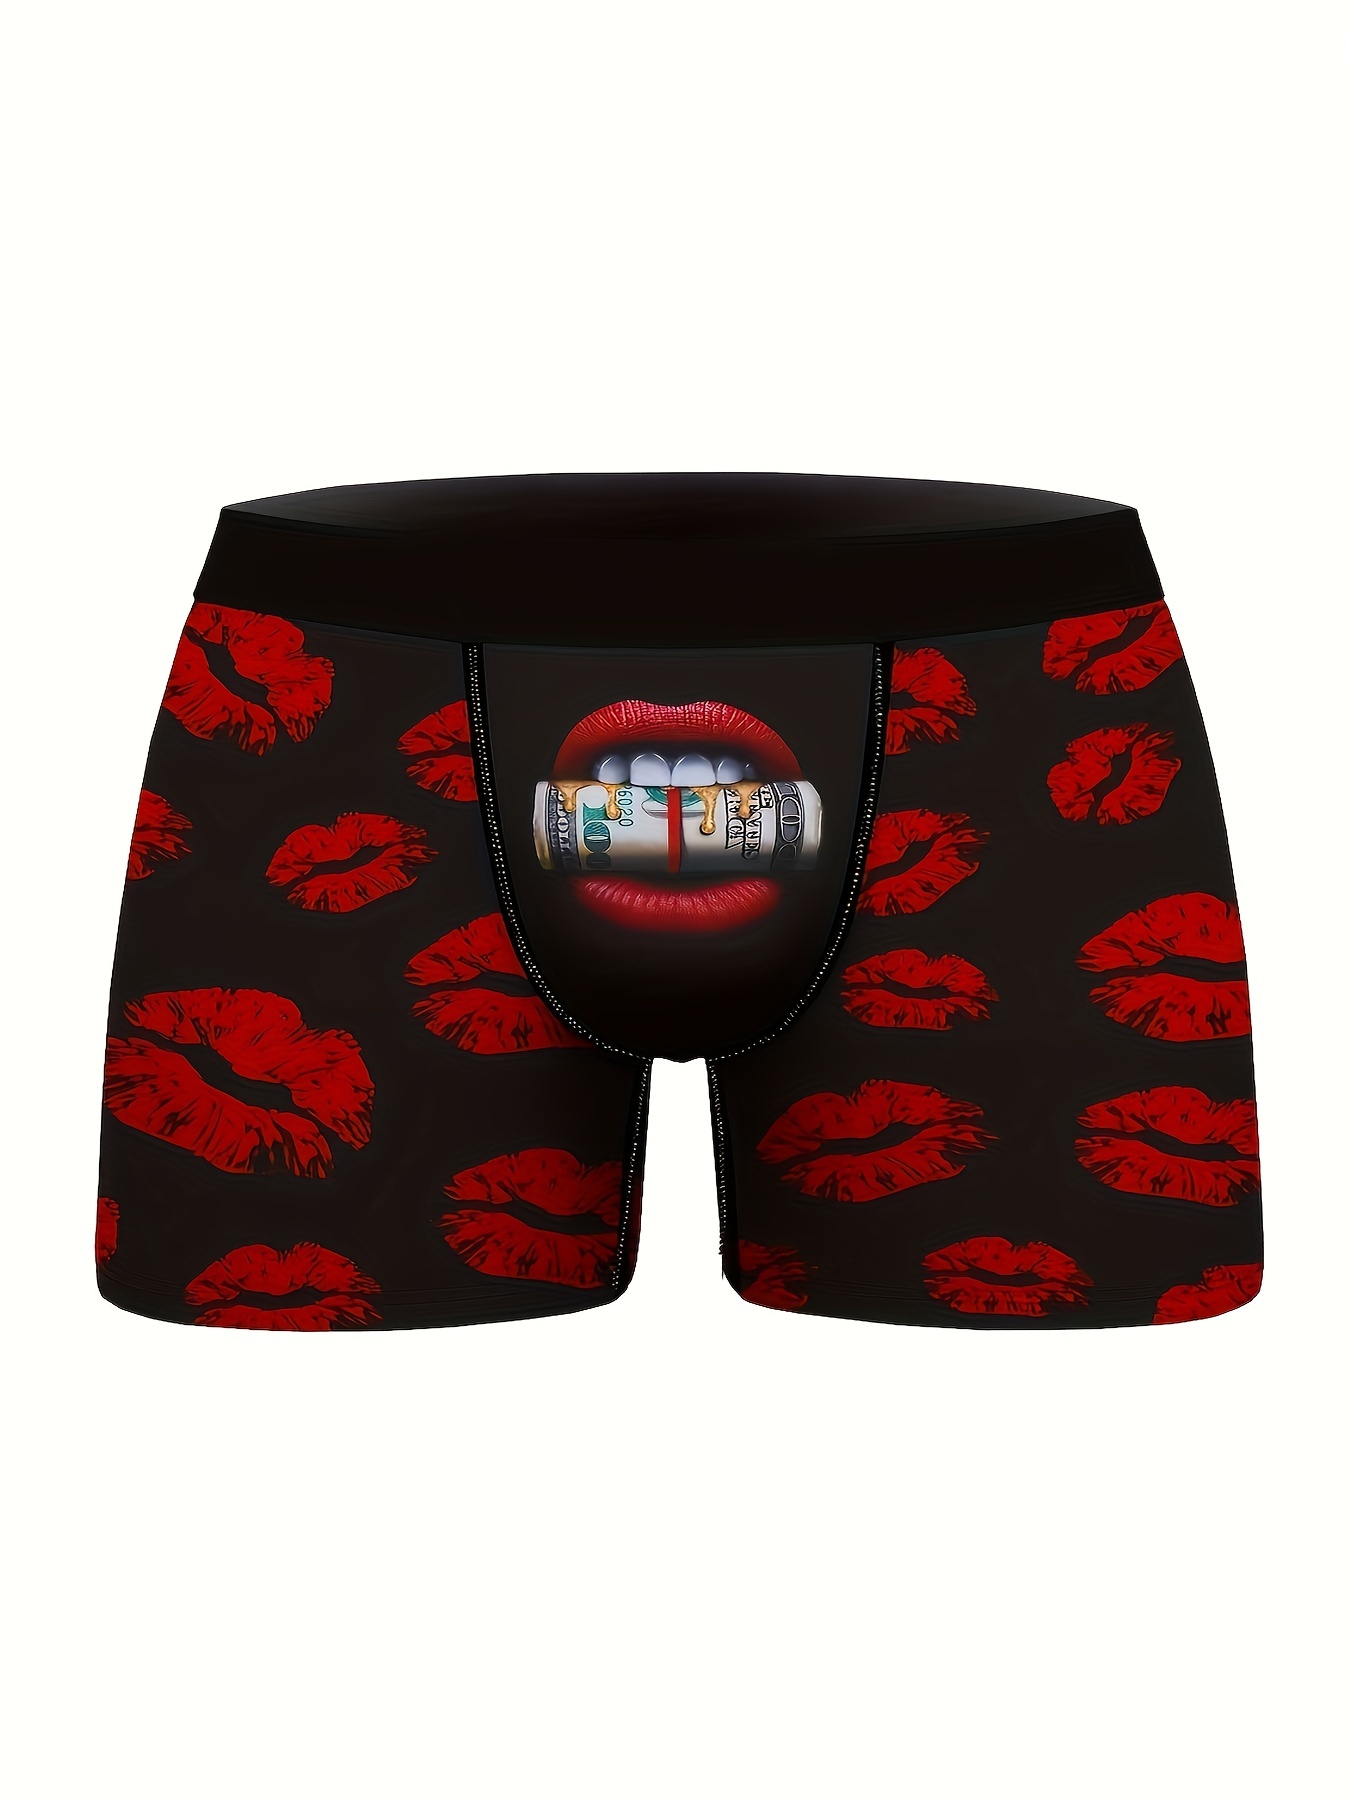 Men's Plus Size 3D Red Lip With Dollar Digital Print Fashion Novelty Boxers  Briefs Underwear, Breathable Comfy Stretchy Quick Drying Sports Underpants